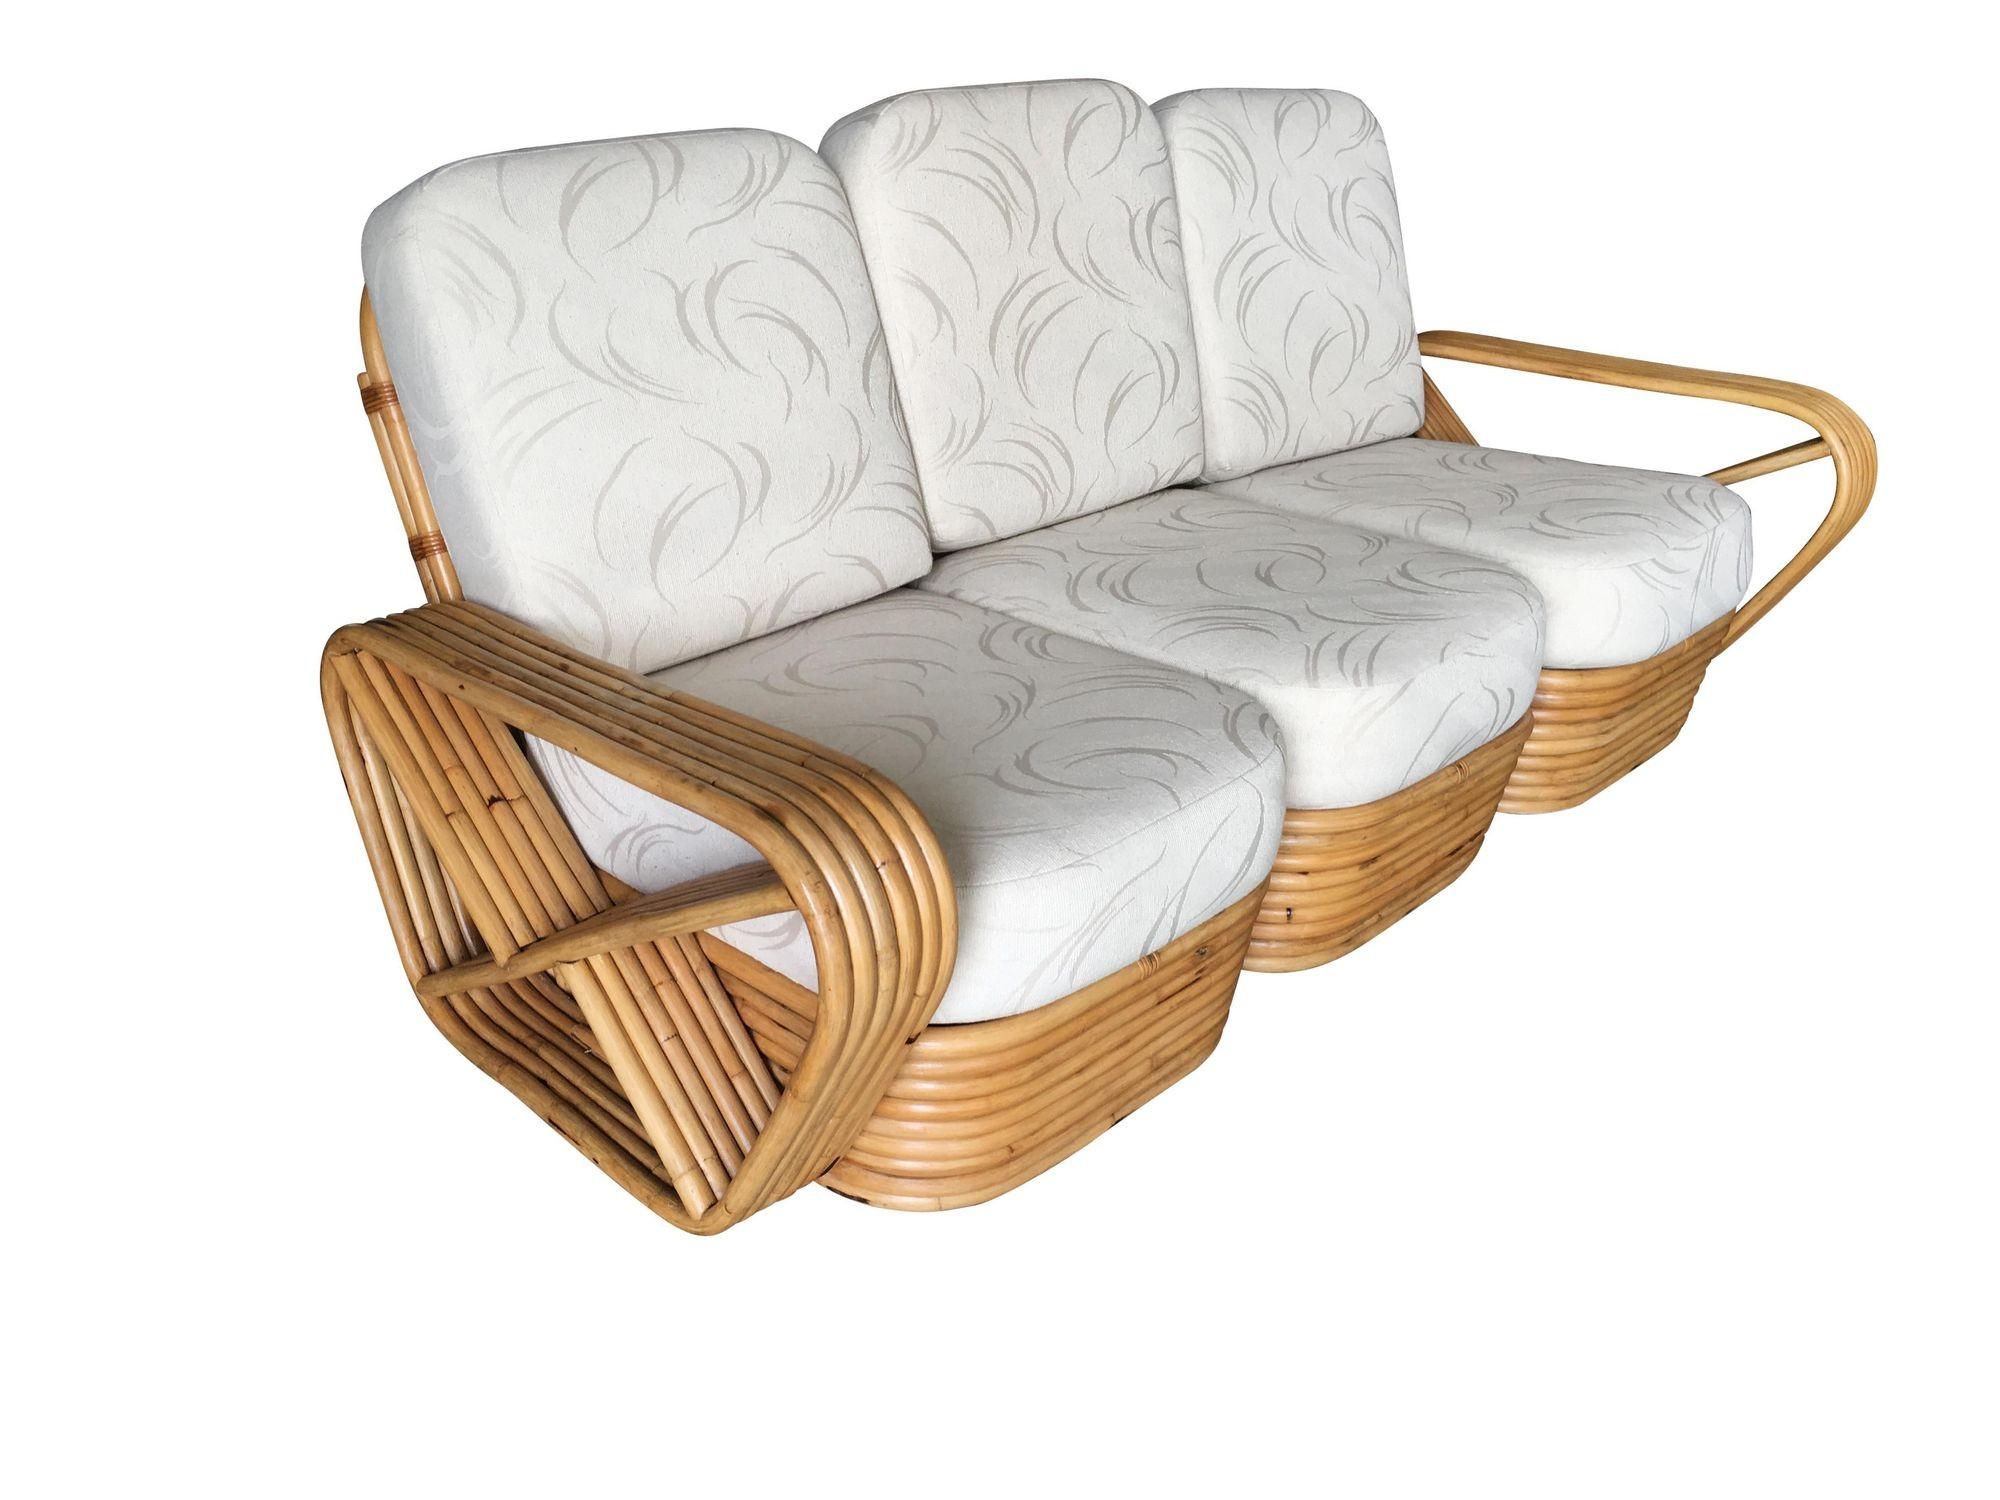 Paul Frankl style rattan living room set including a matching three-seat sectional sofa, and pair of end tables. The sofa features the famous six strand square pretzel side arms and stacked rattan base with matching stacked rattan side tables (pair)